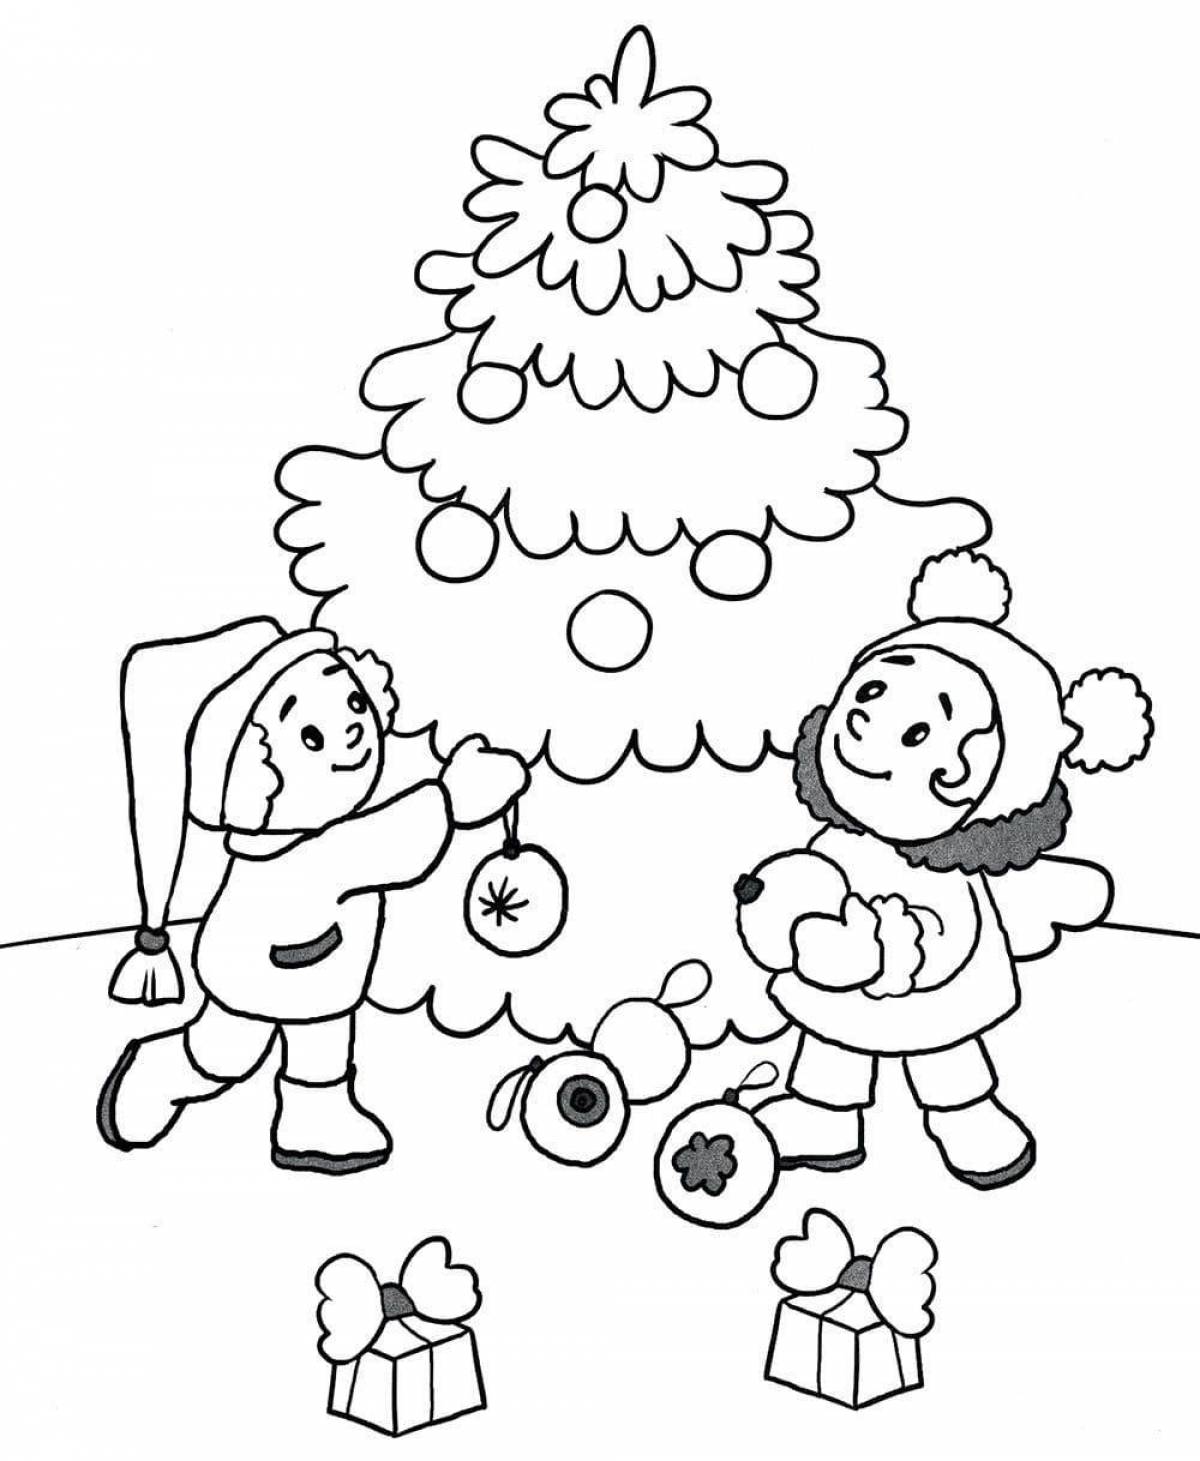 Shiny winter coloring book for kids 6-7 years old